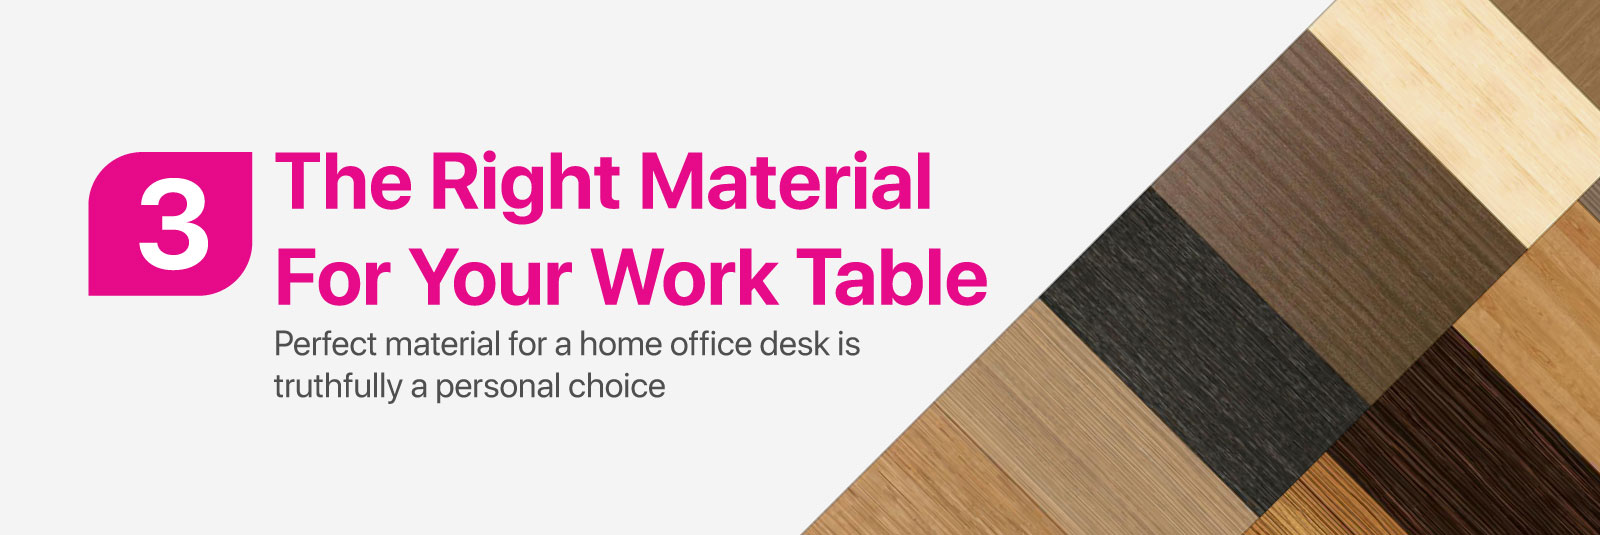 The Right Material For Your Work Table - Perfect material for a home office desk is truthfully a personal choice